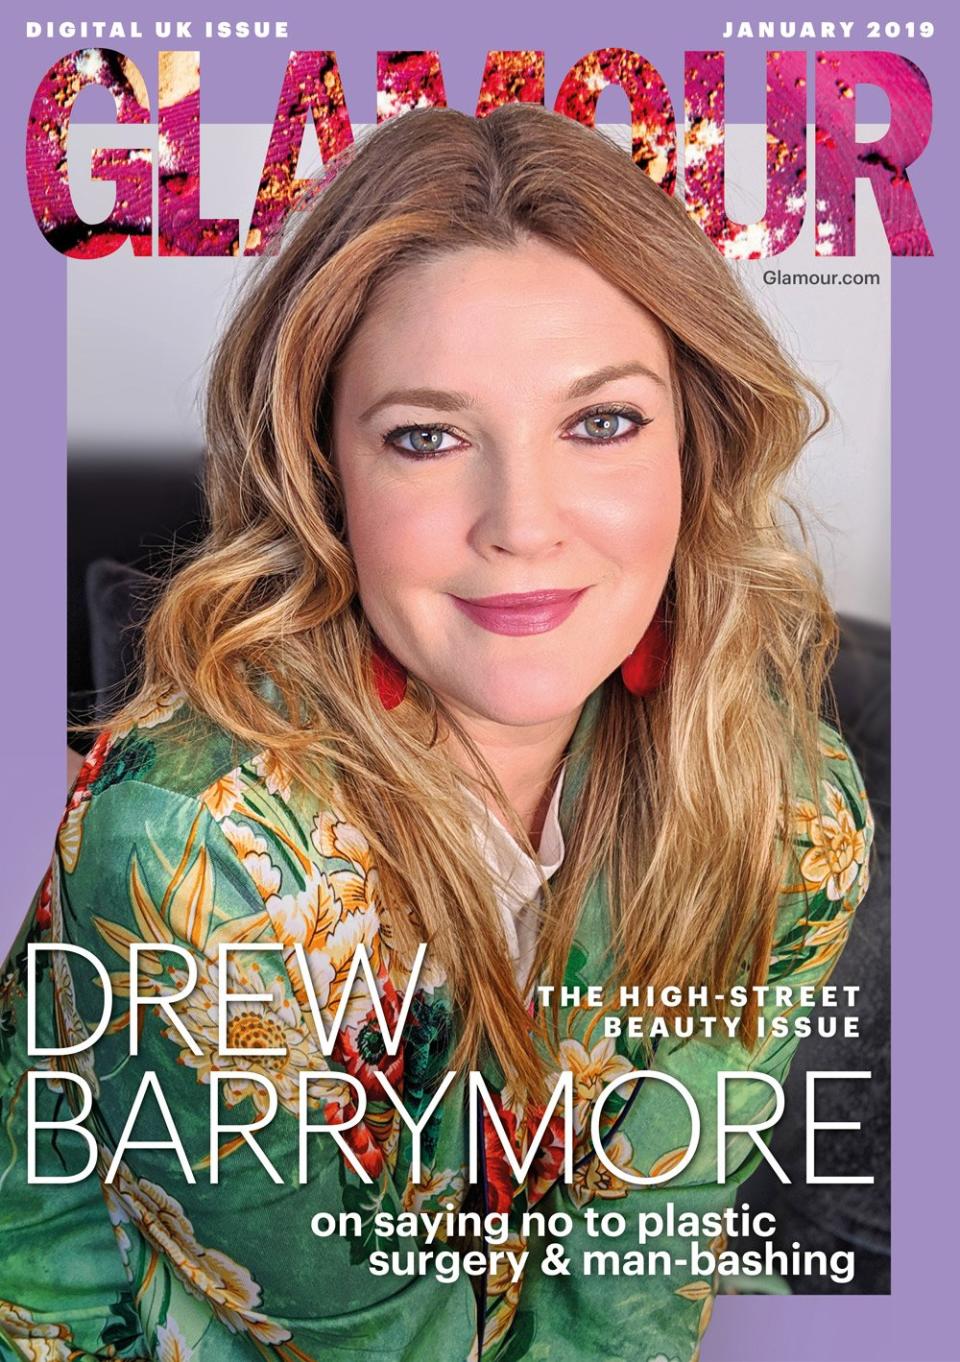 Cover star: Actress Drew Barrymore (Glamour Magazine)